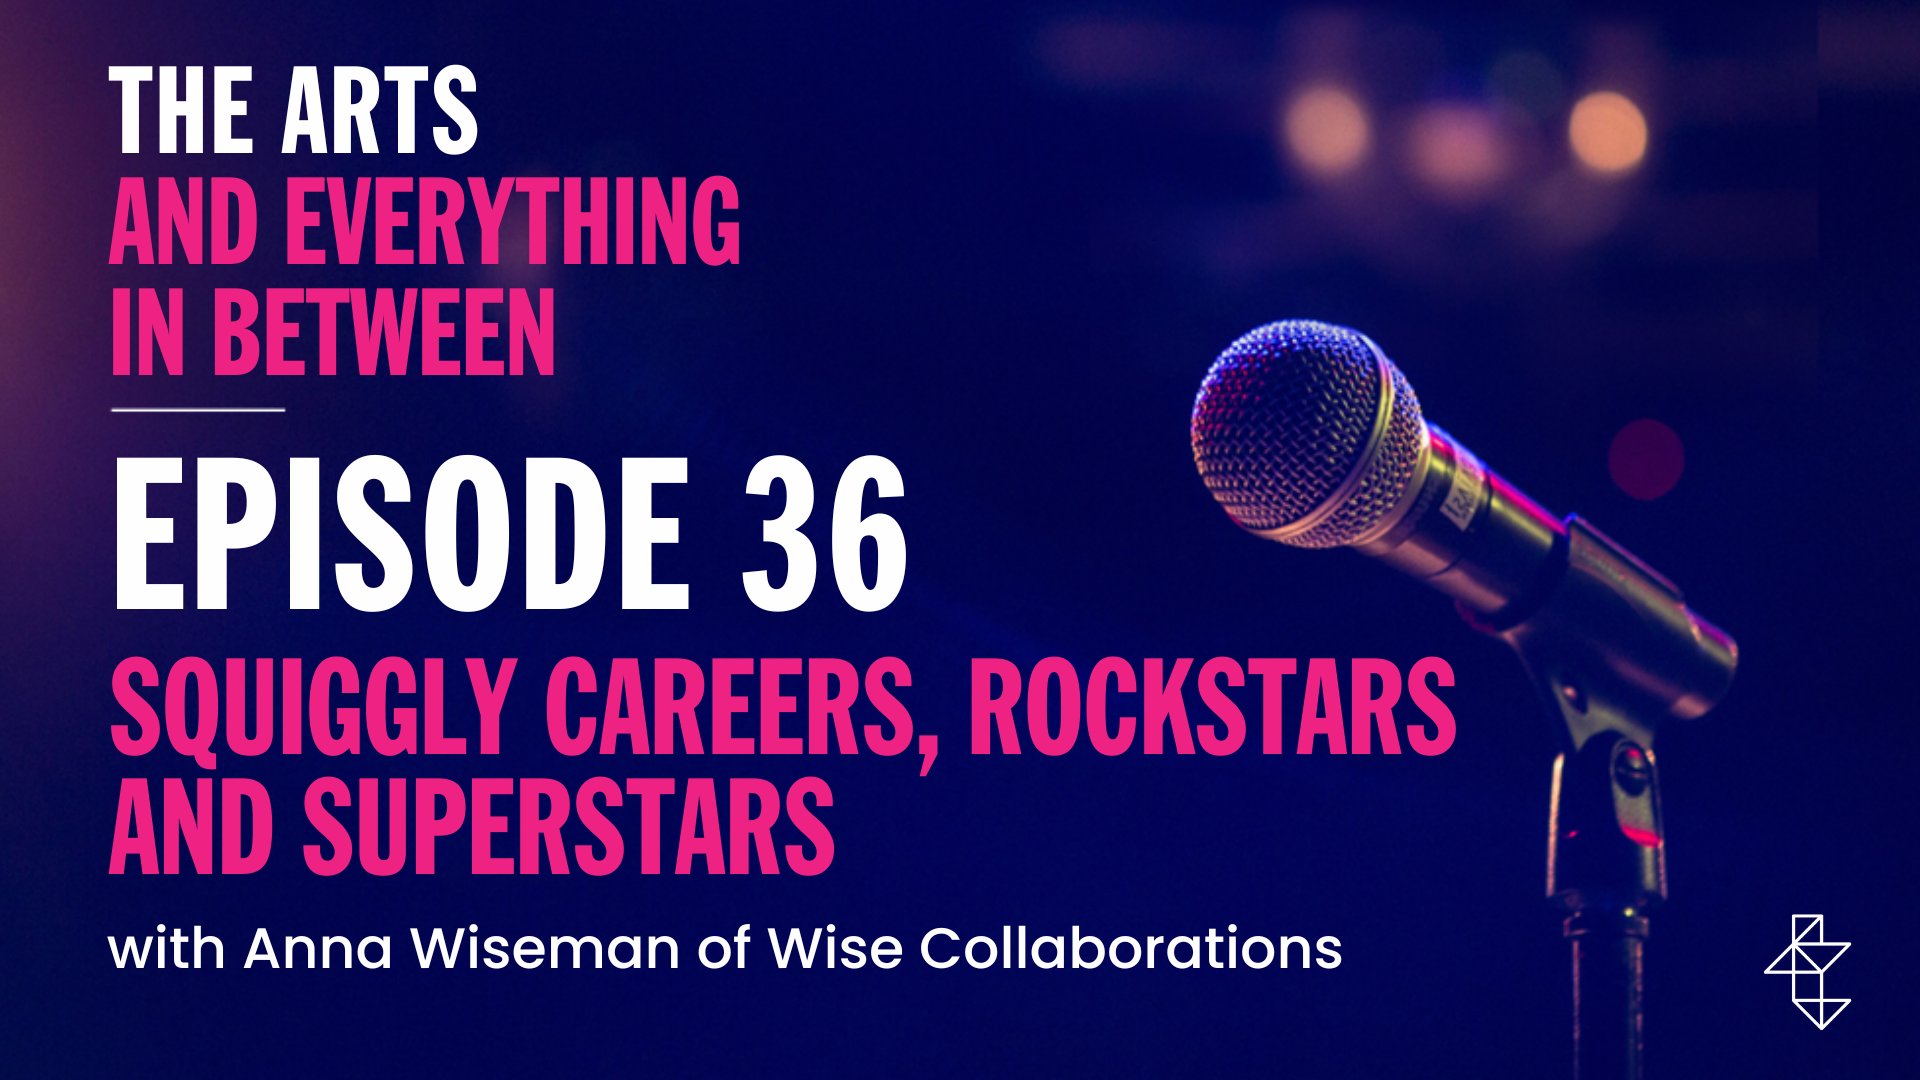 The Arts and Everything in Between Episode 36 - Squiggly Careers, Rockstars and Superstars with Anna Wiseman of Wise Collaborations